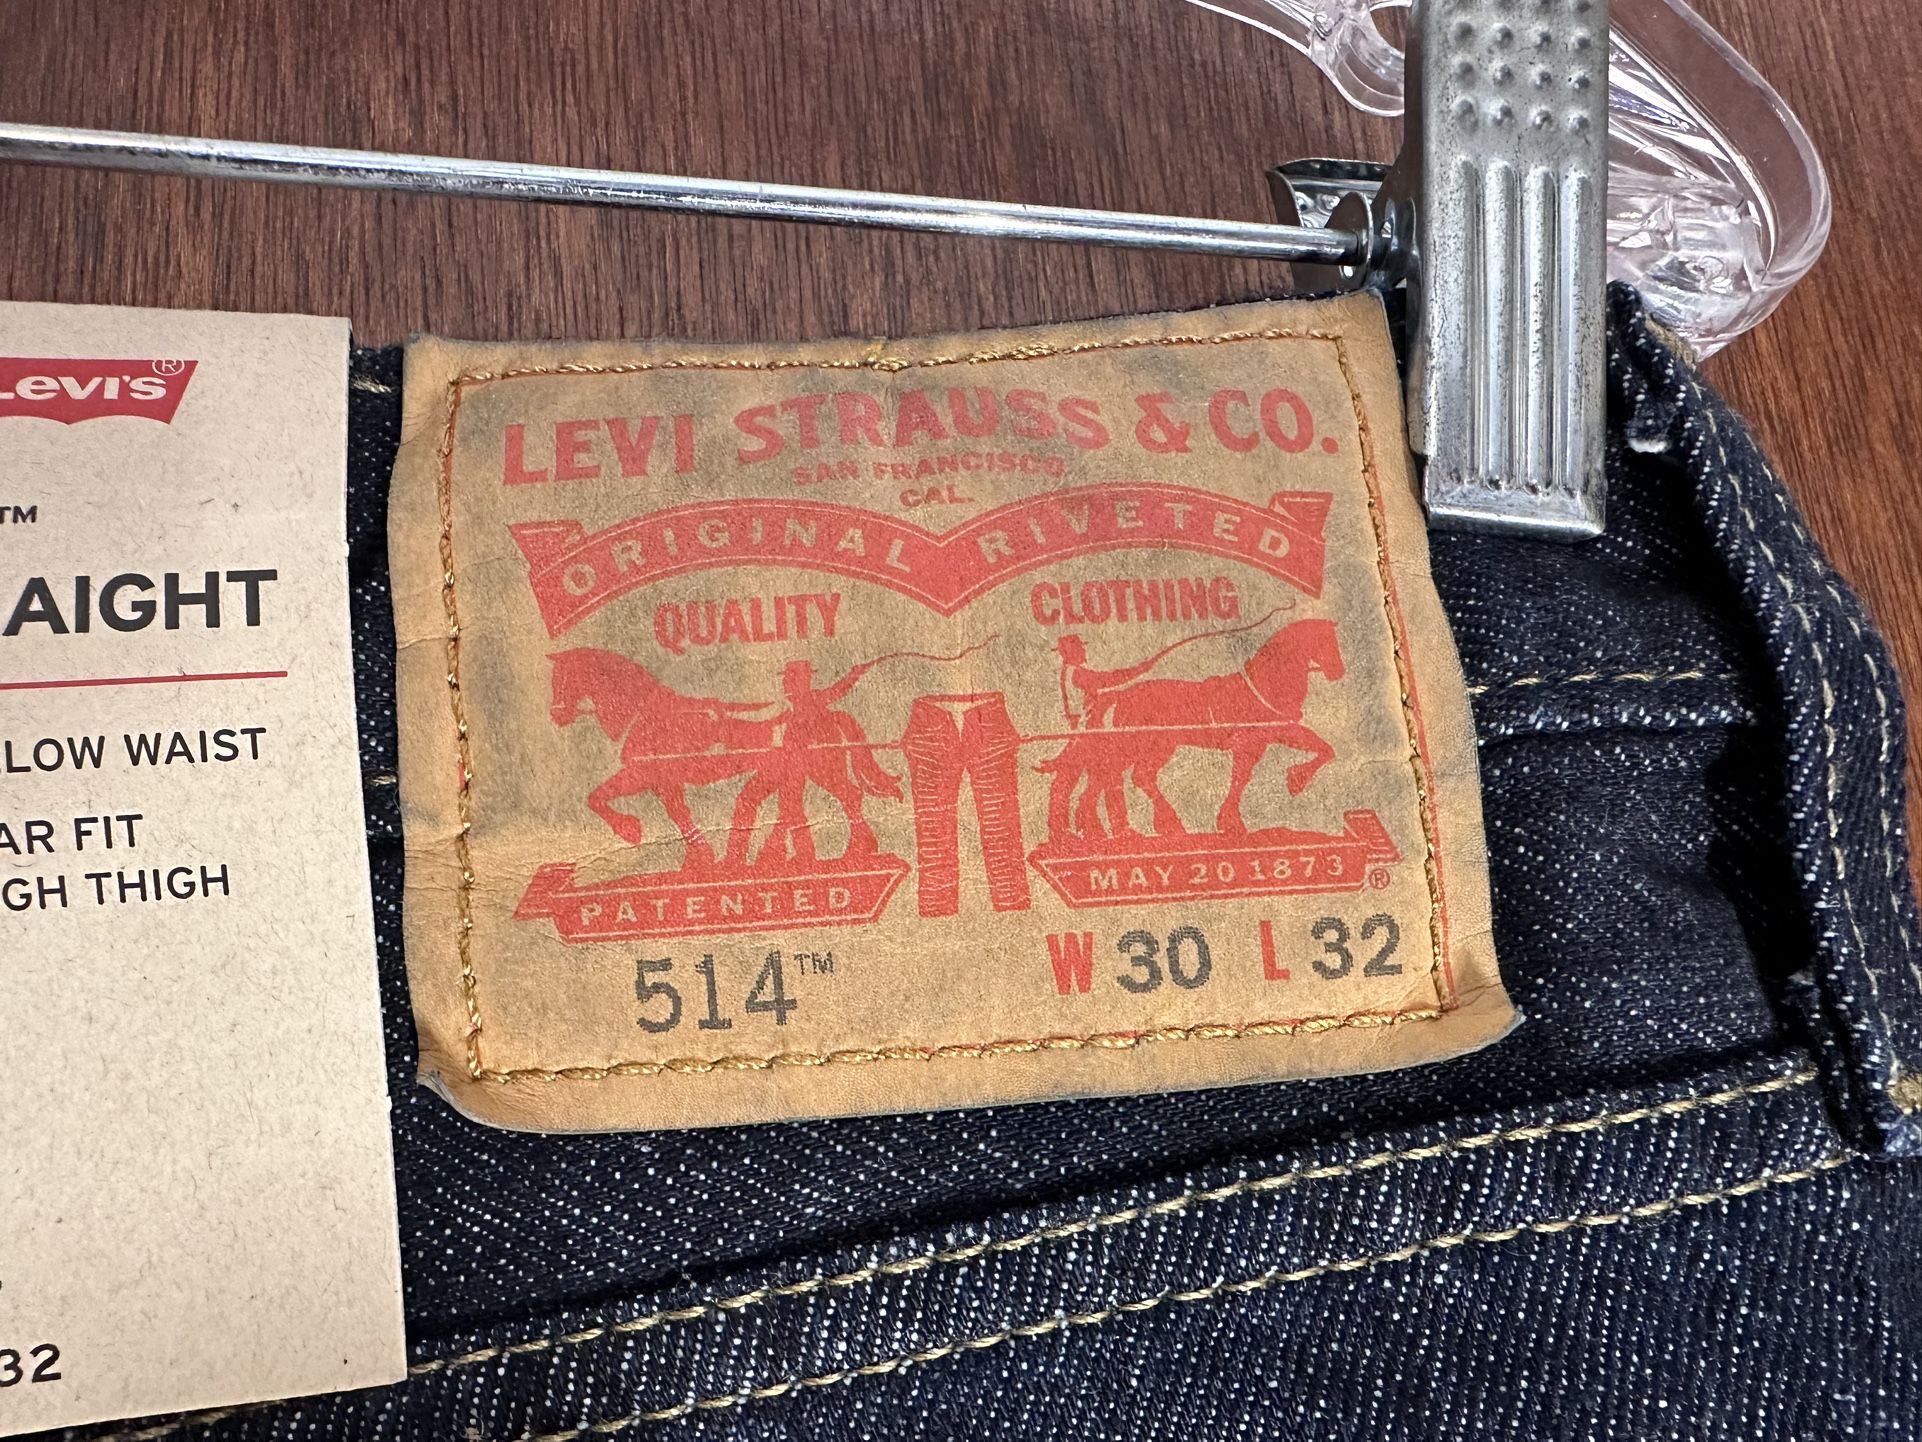 NWT 514 Levis Jeans 30x32